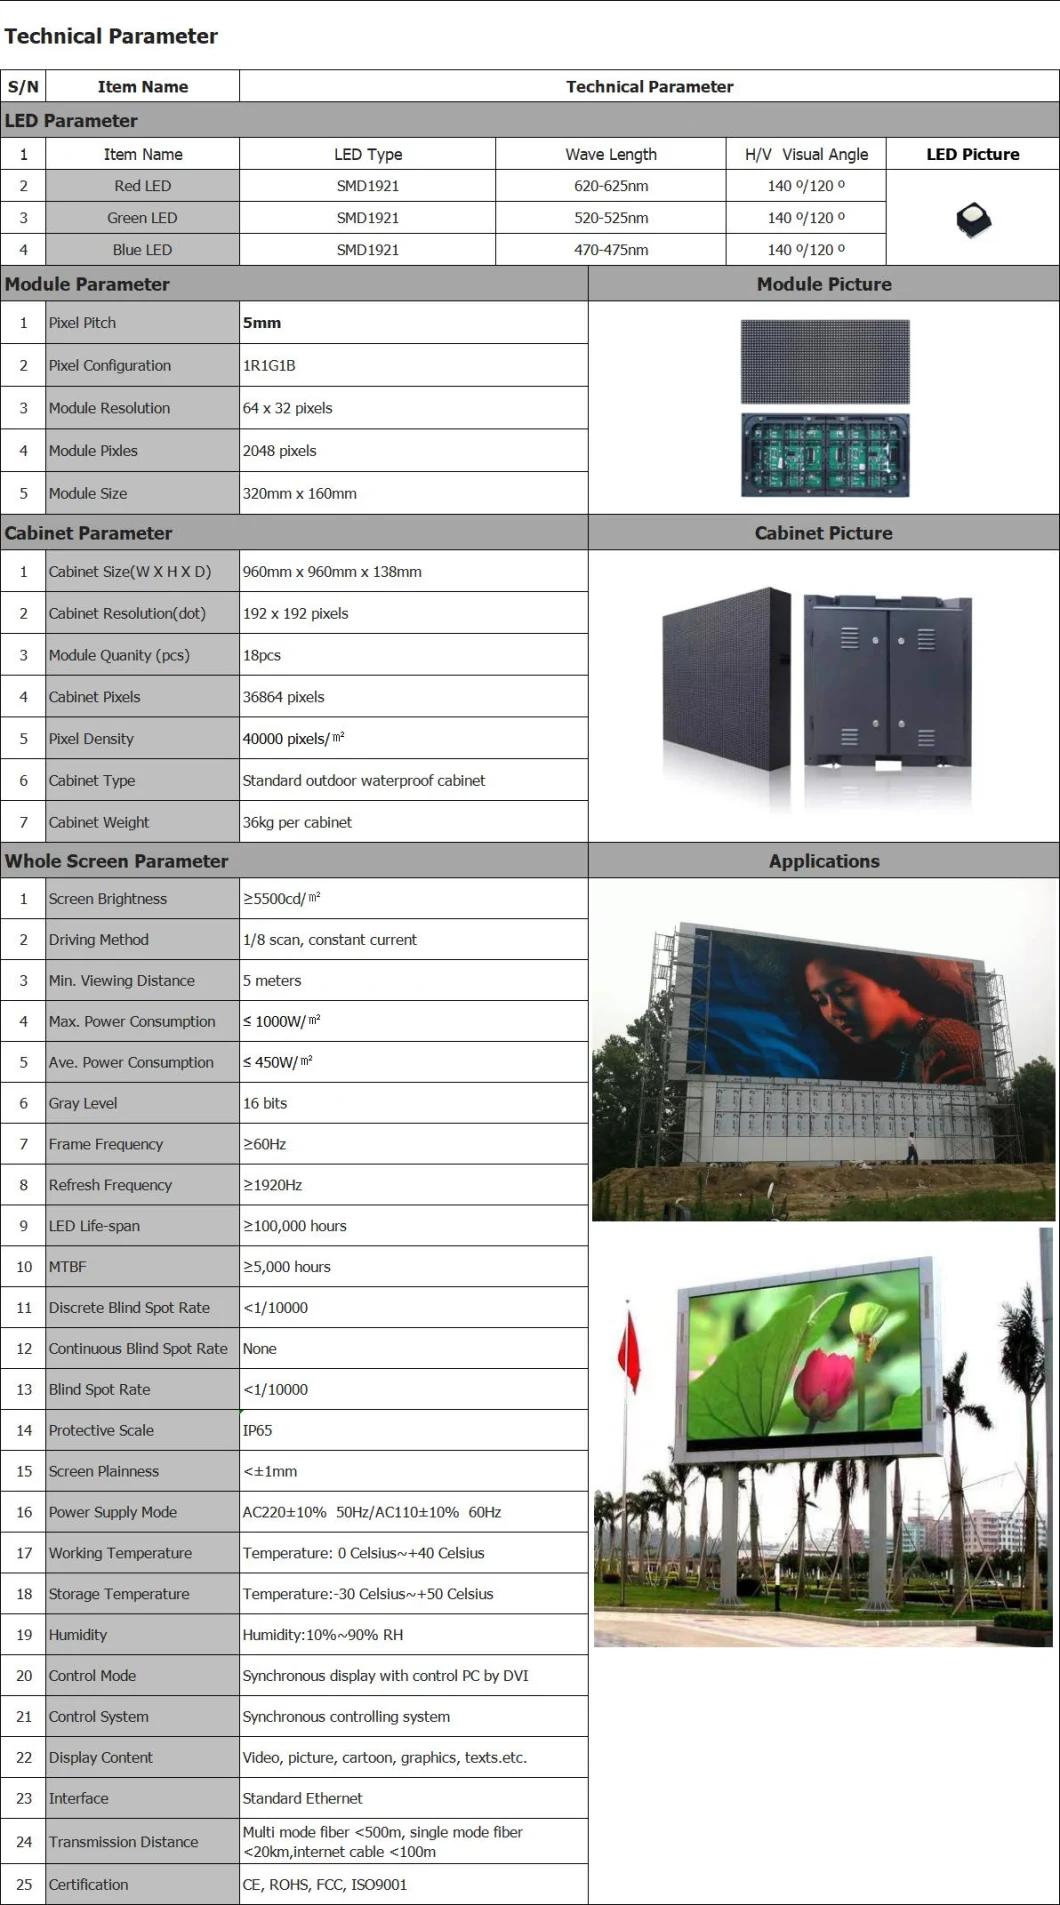 Full Color Digital Video Wall External LED Commercial Display Board (P5)